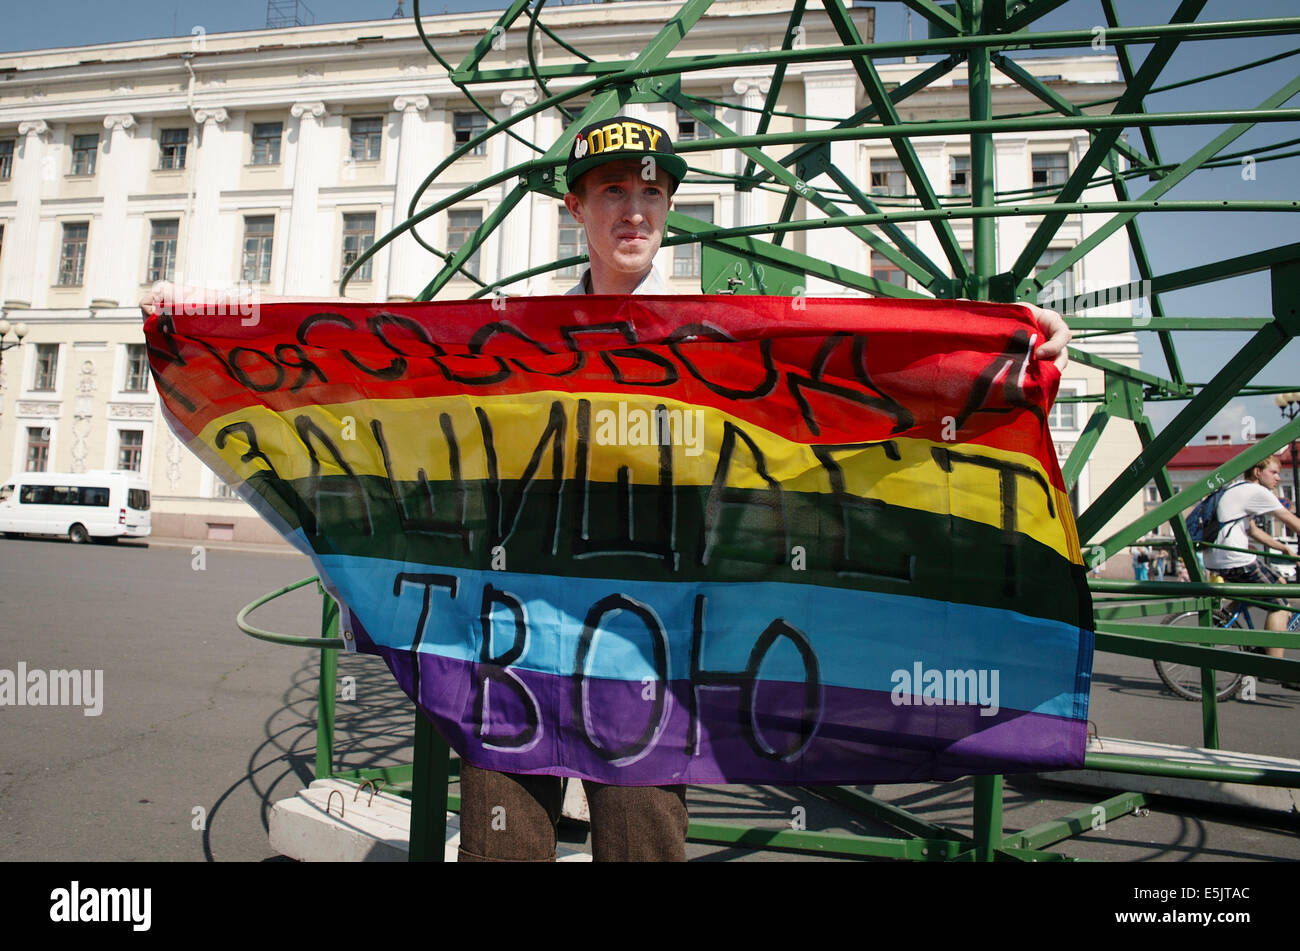 St Petersburg, Russia. 2nd Aug, 2014. LGBT gay activist KIRILL KALUGIN during a one-man protest in Palace Square. The signs on the flag reads 'My freedom protects yours.' Credit:  Denis Tarasov/ZUMA Wire/ZUMAPRESS.com/Alamy Live News Stock Photo